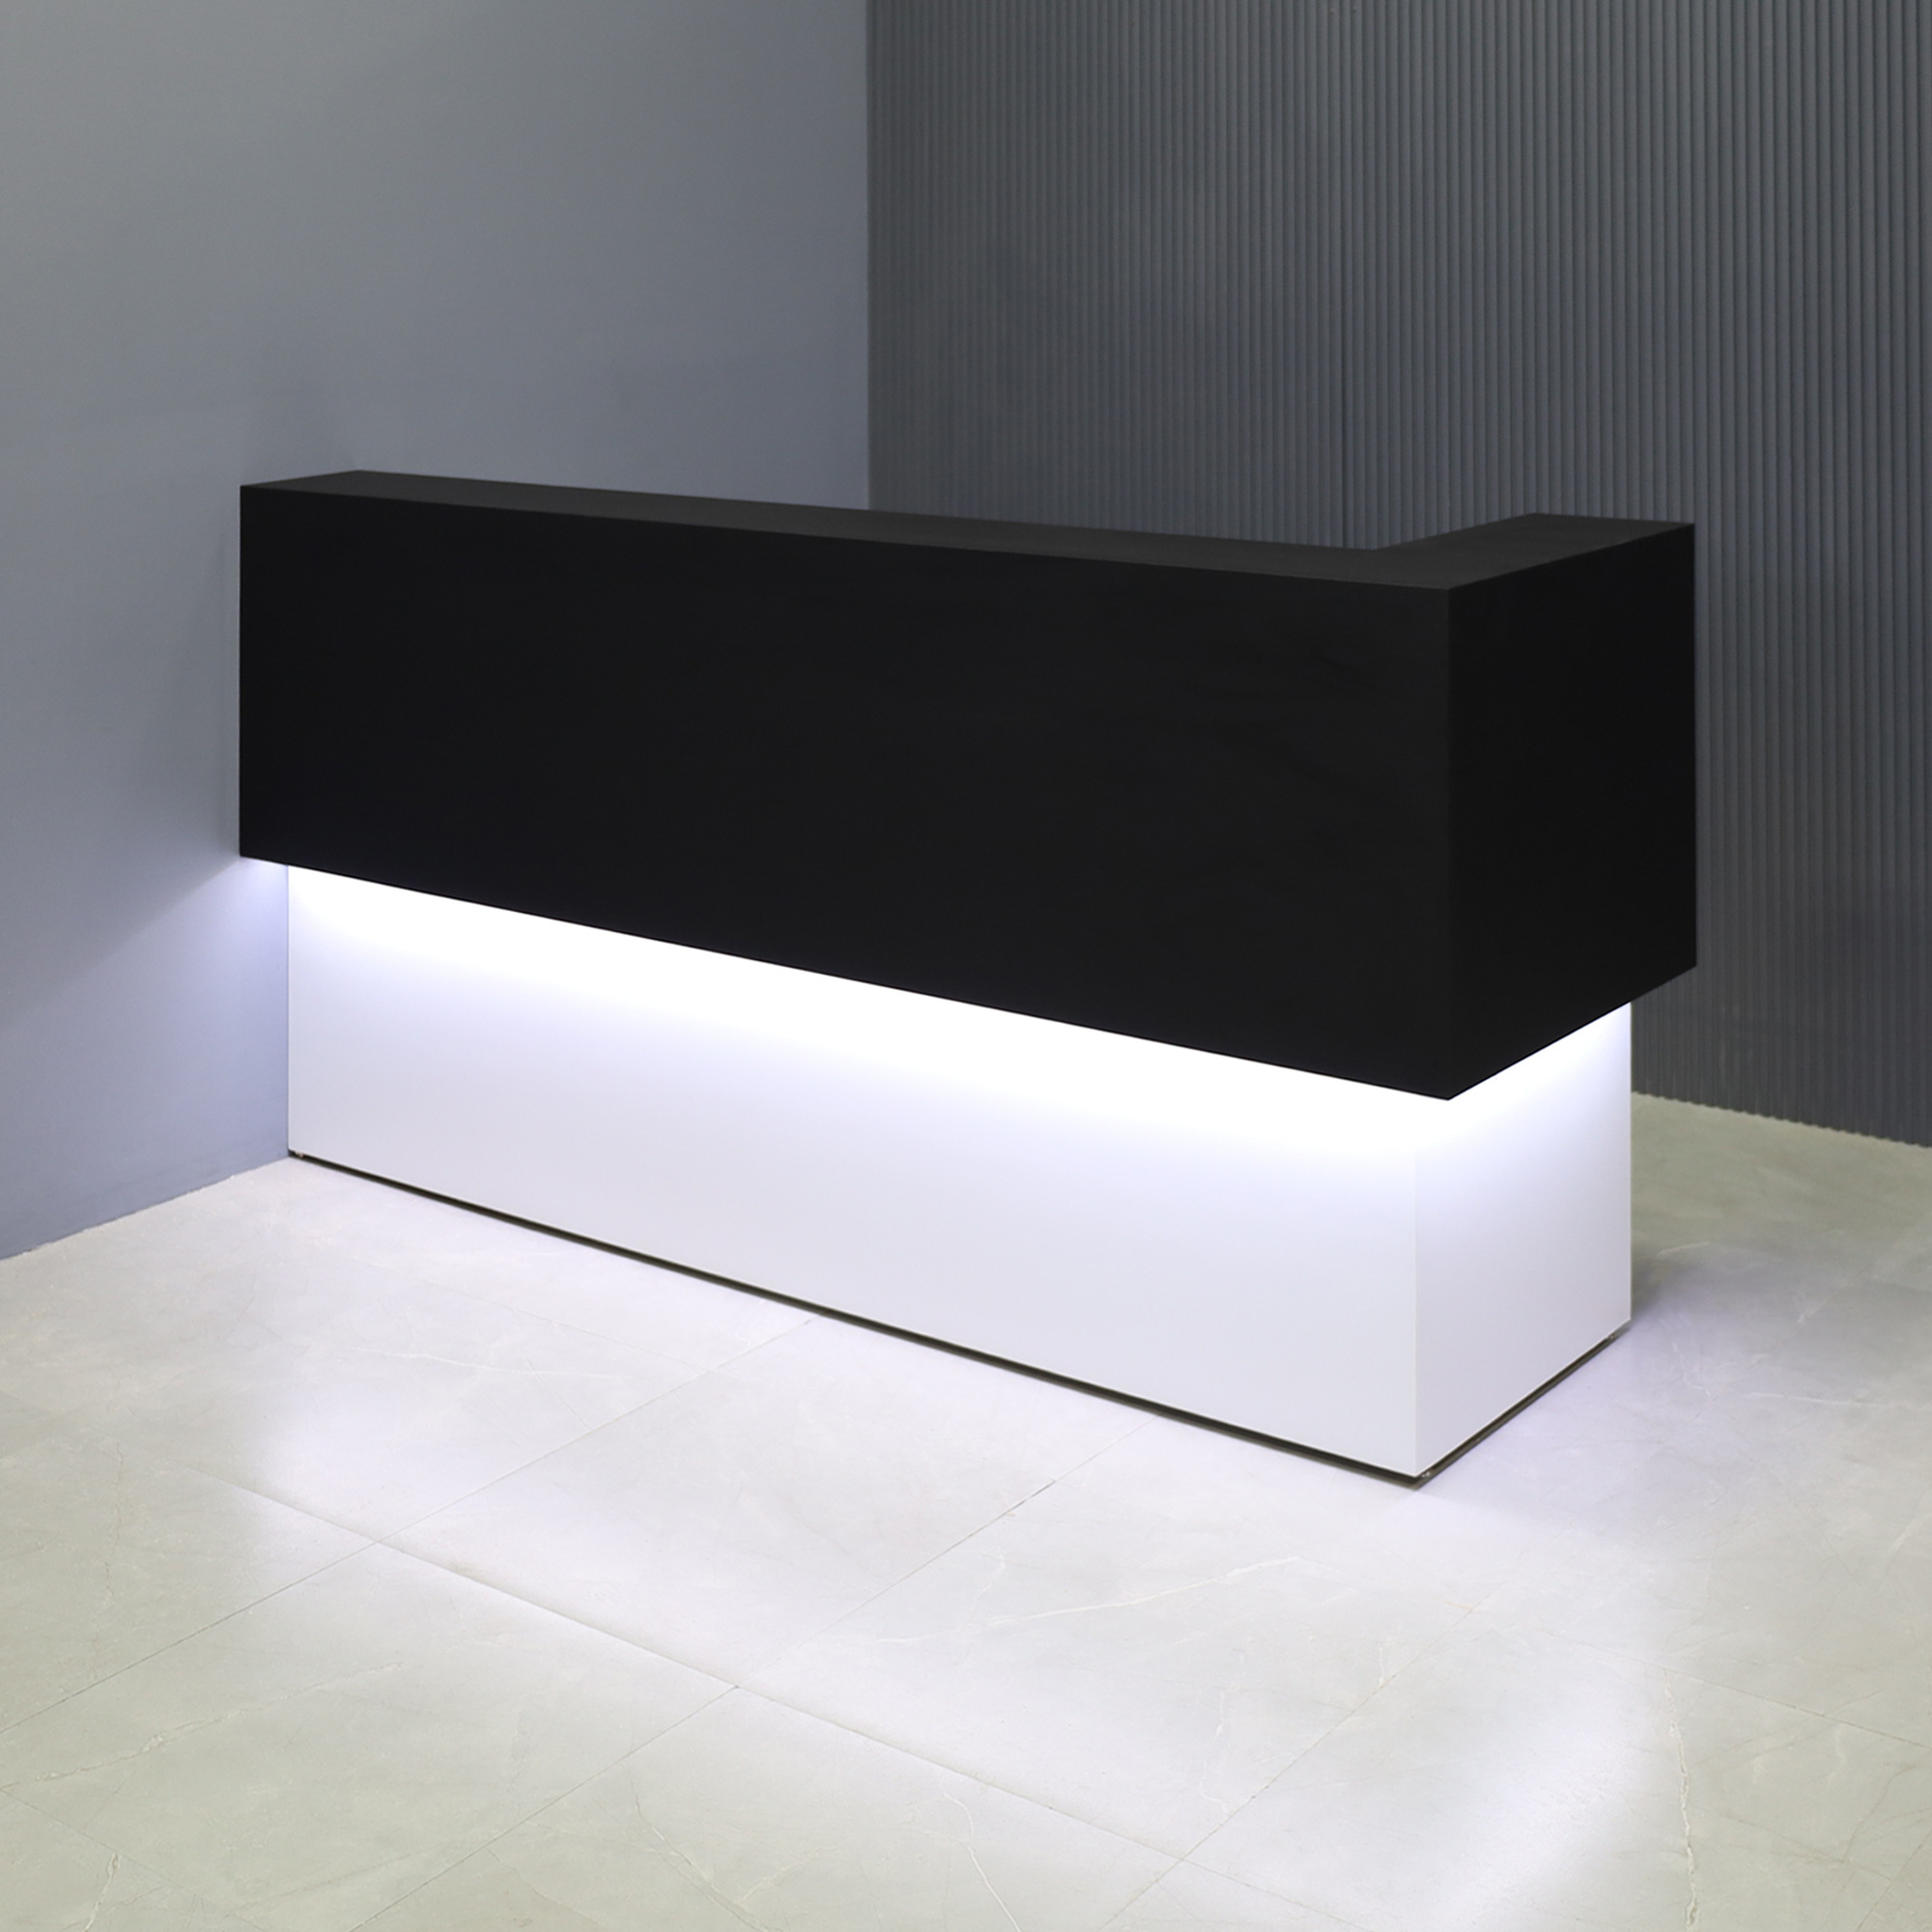 90-inch San Francisco L-Shape Reception Desk, right l-panel side when facing front in black matte laminate counter and white matte laminate desk, with white LED, shown here.